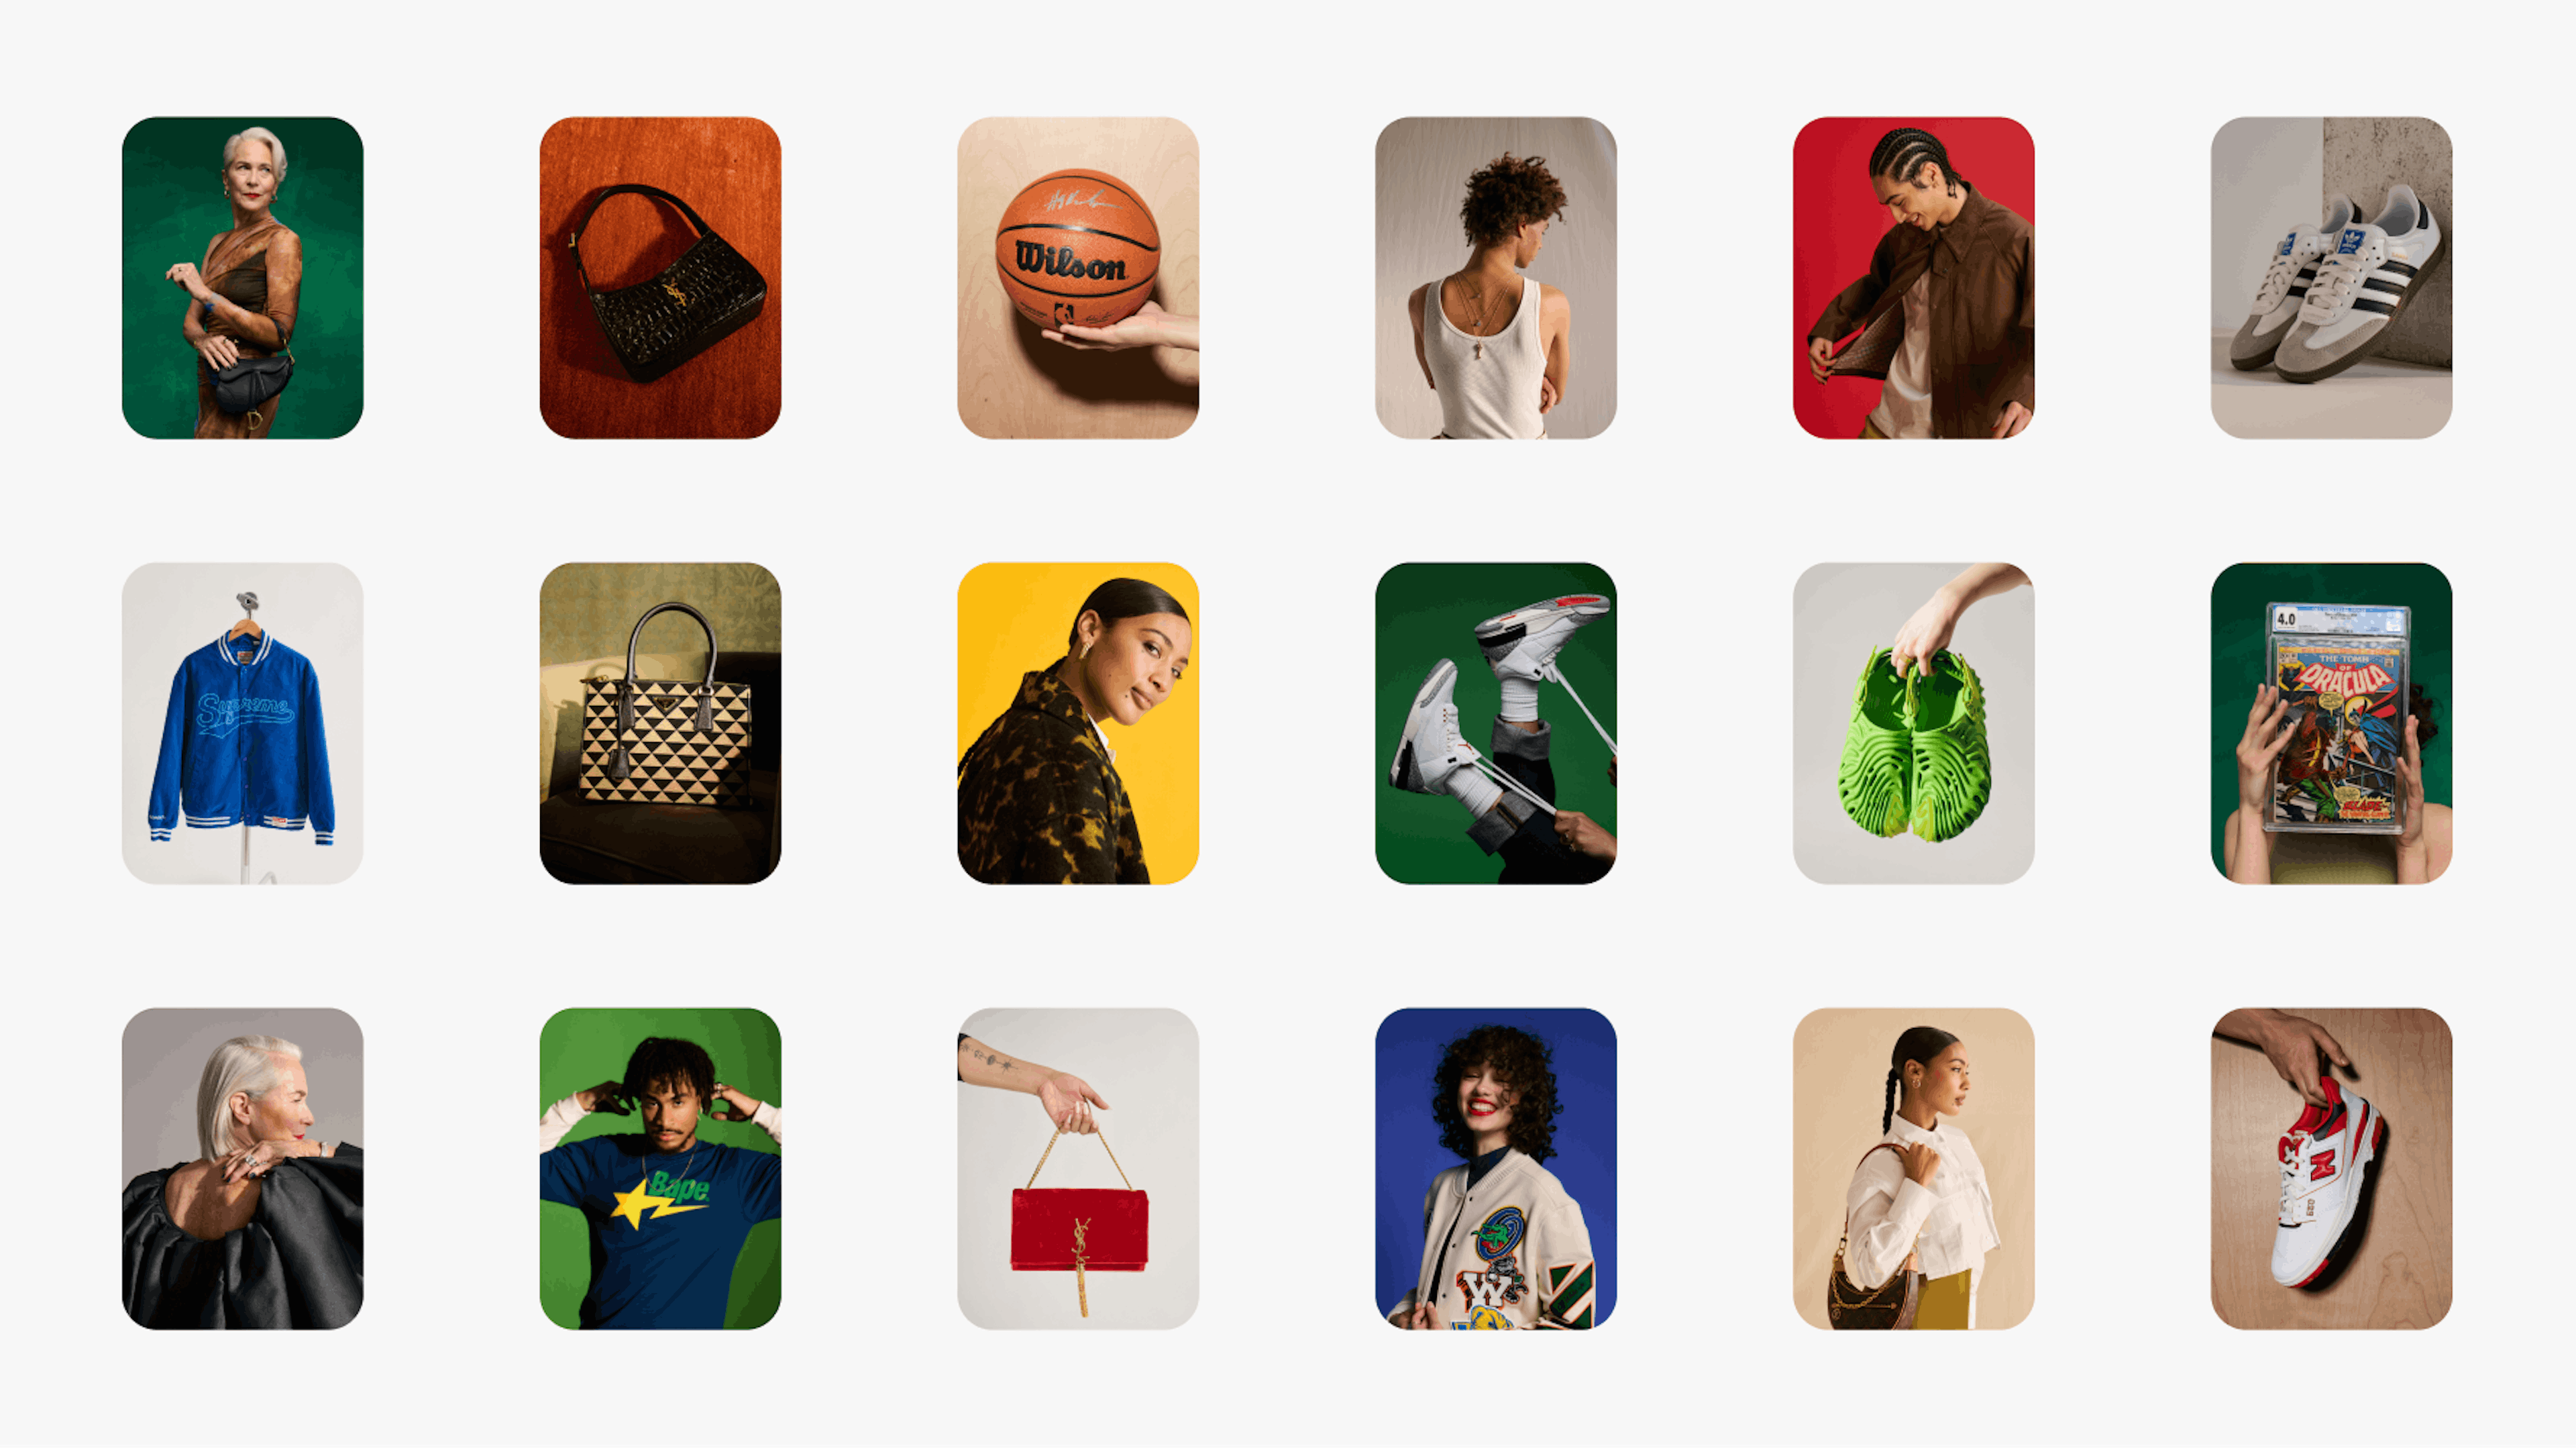 A grid of brand photos full of colorful backgrounds and studio shots featuring collectibles, jewelry, fashion, and sports items.